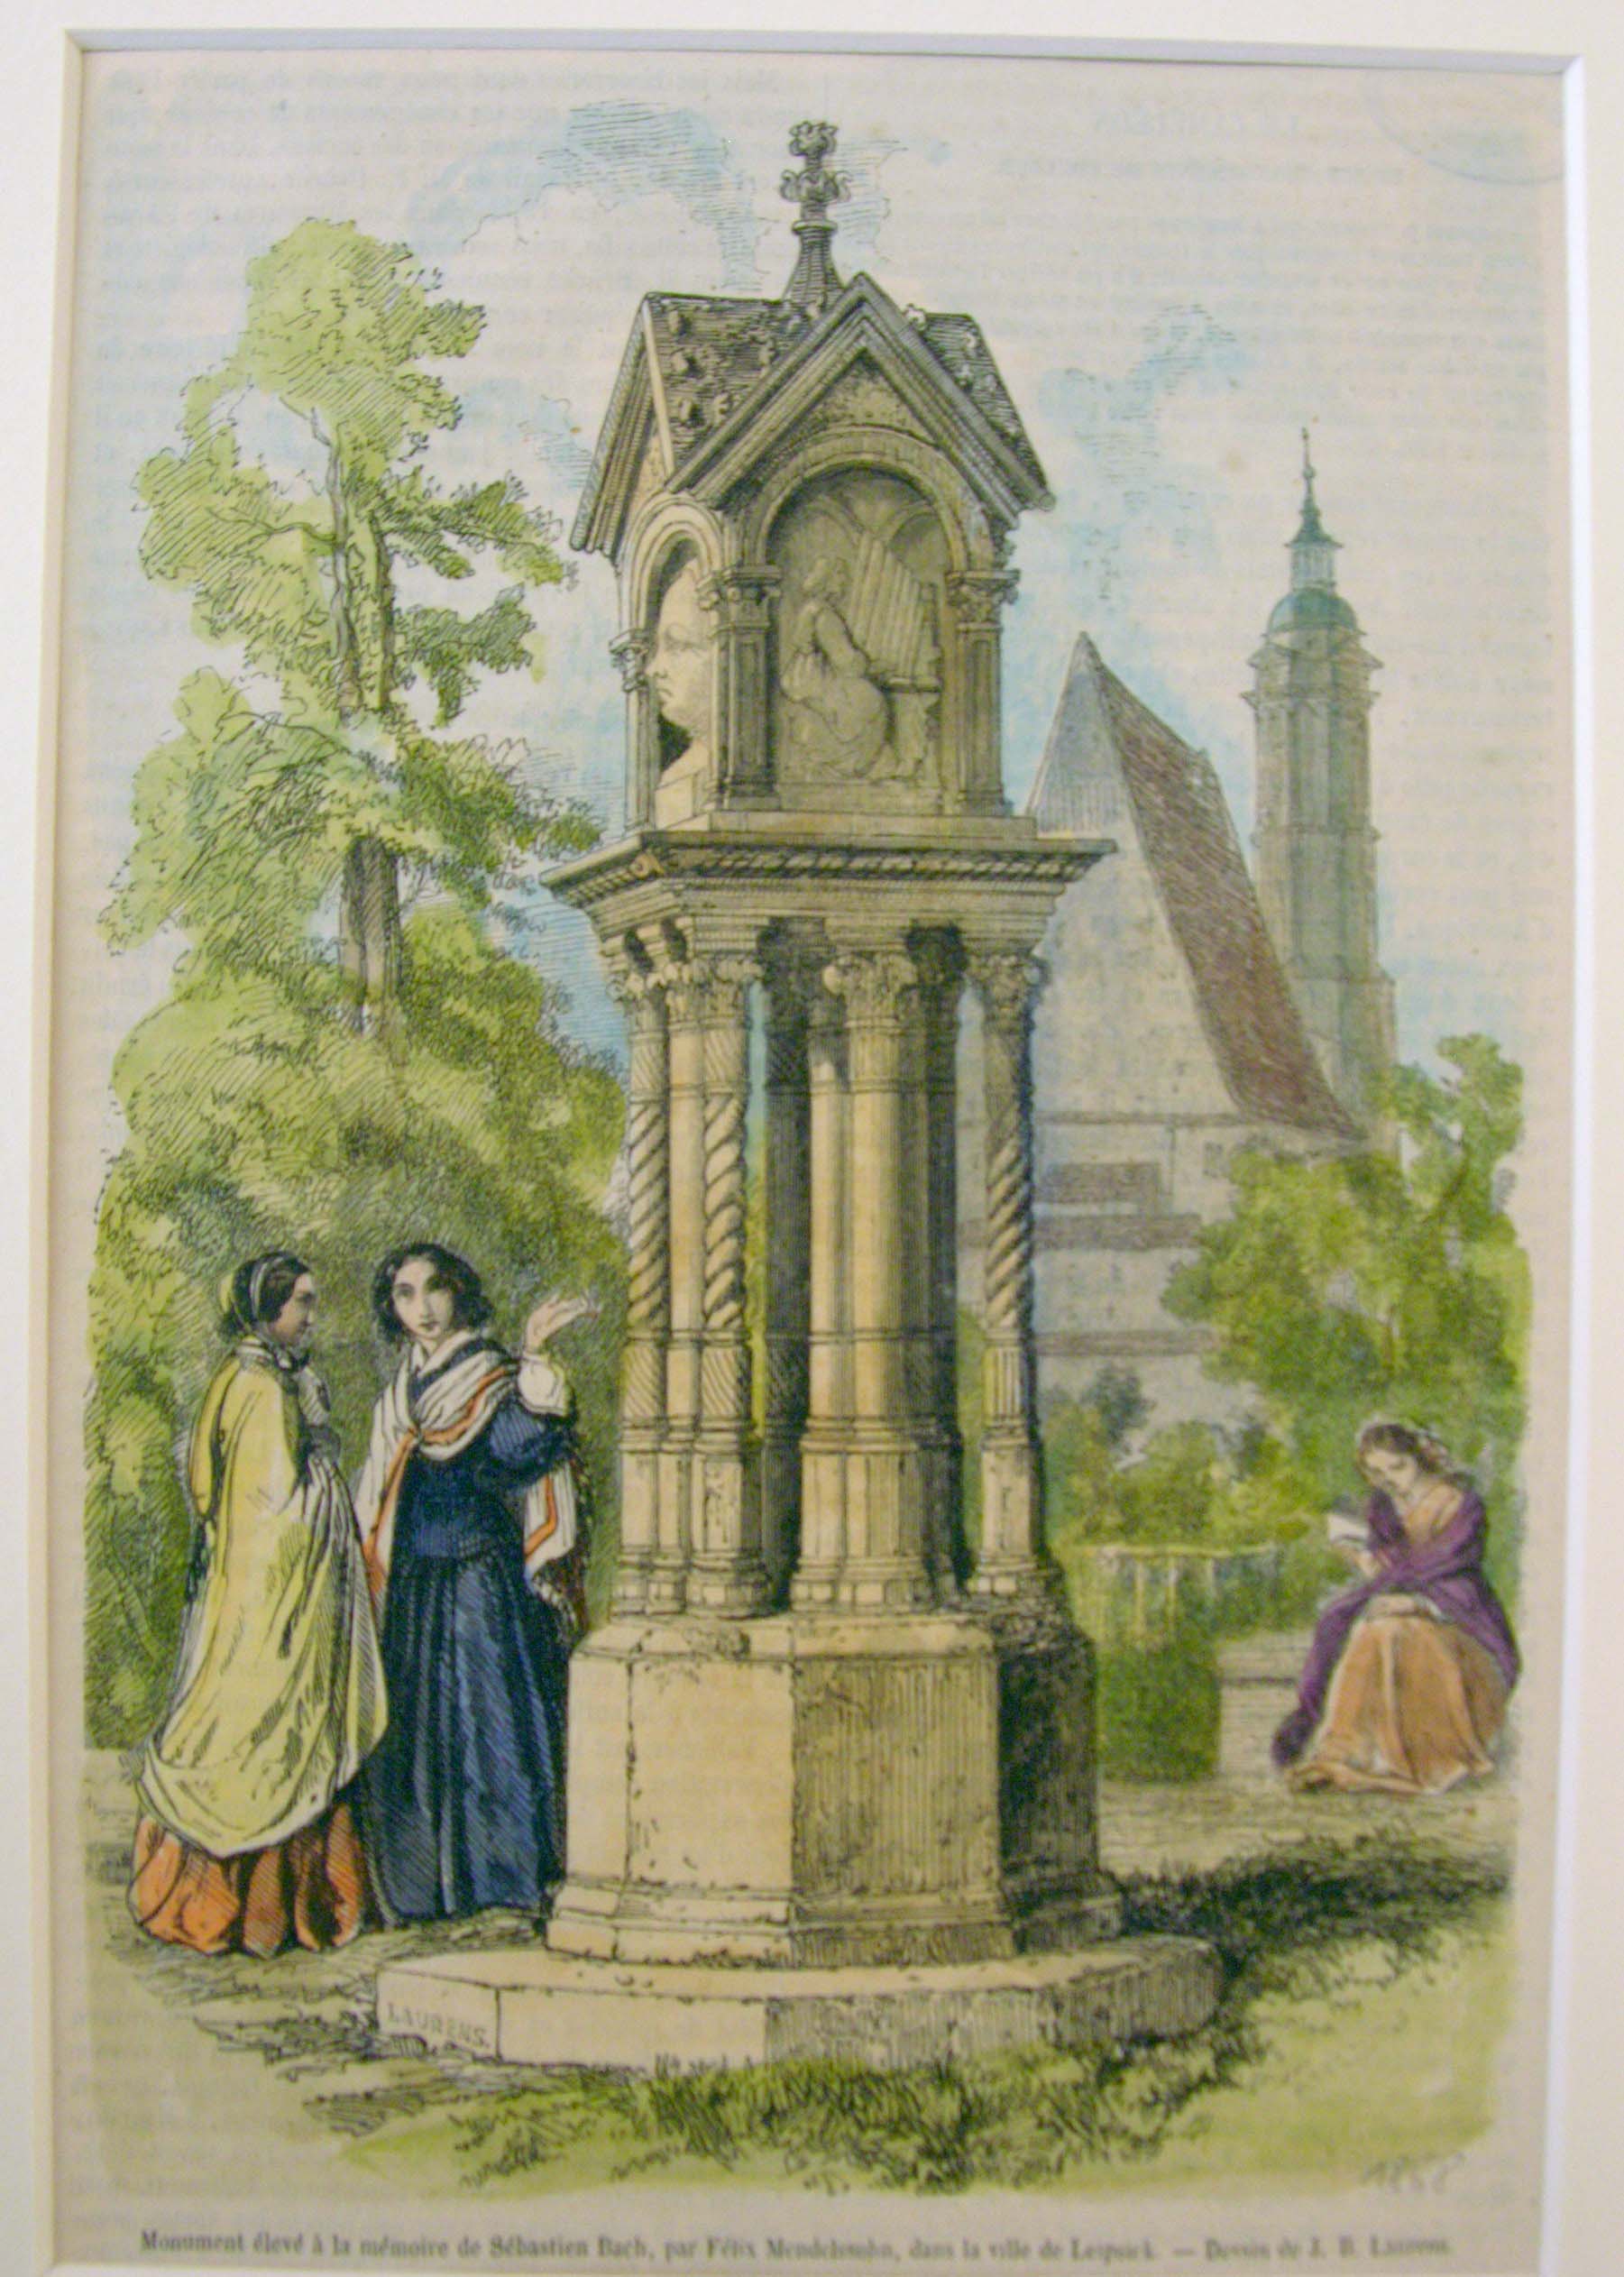 Woodcarving print based on an aquarel by Eduard Bendemann (1850) of the monument for Bach in Leipzig, erected by Felix Mendelssohn in 1843. It may very well be the only example of a monument erected by a composer to honour another.